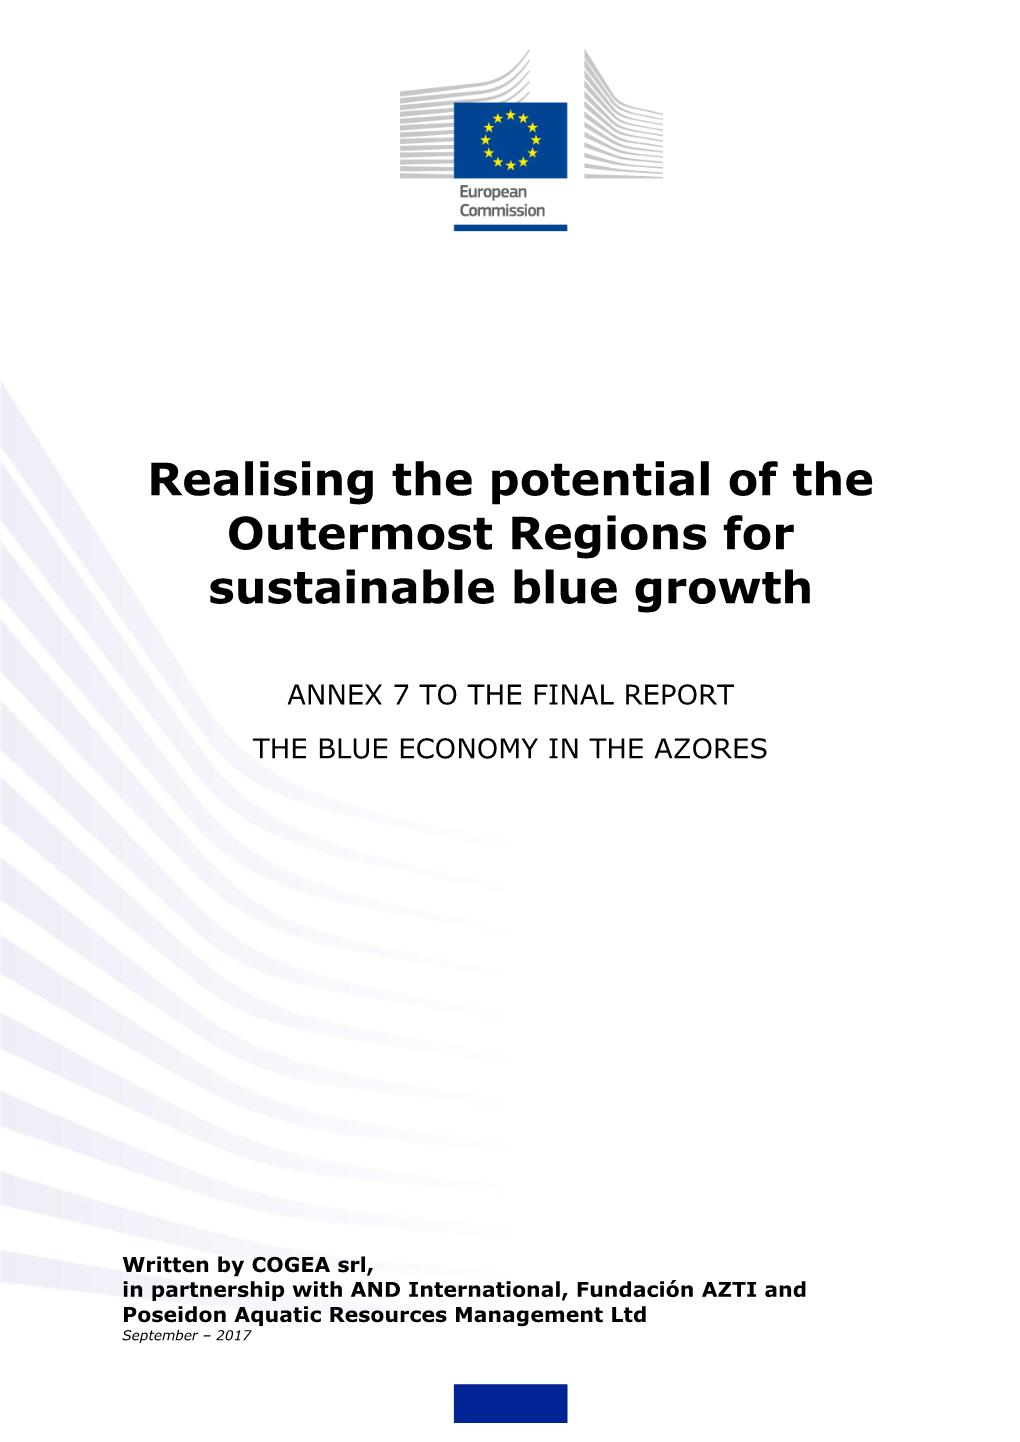 Realising the Potential of the Outermost Regions for Sustainable Blue Growth